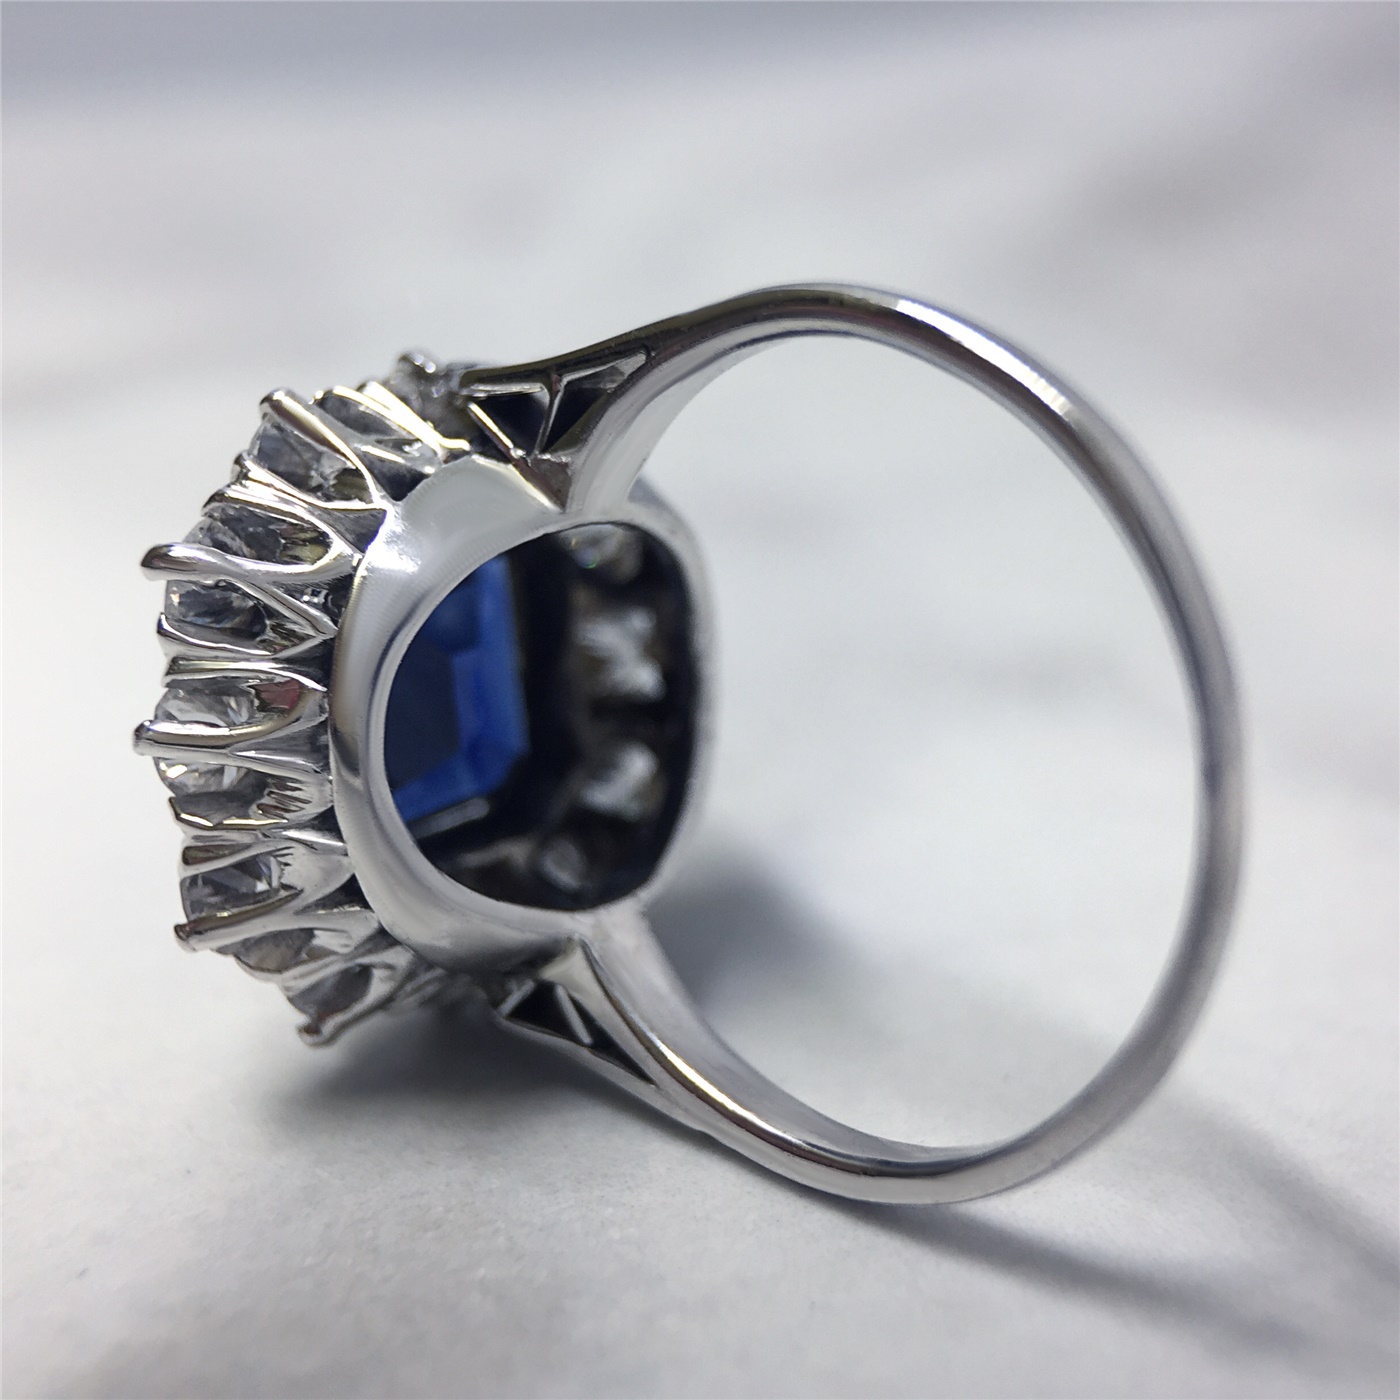 1920s Vintage Sapphire and Diamond Engagement Ring - Antique Sapphire Ring